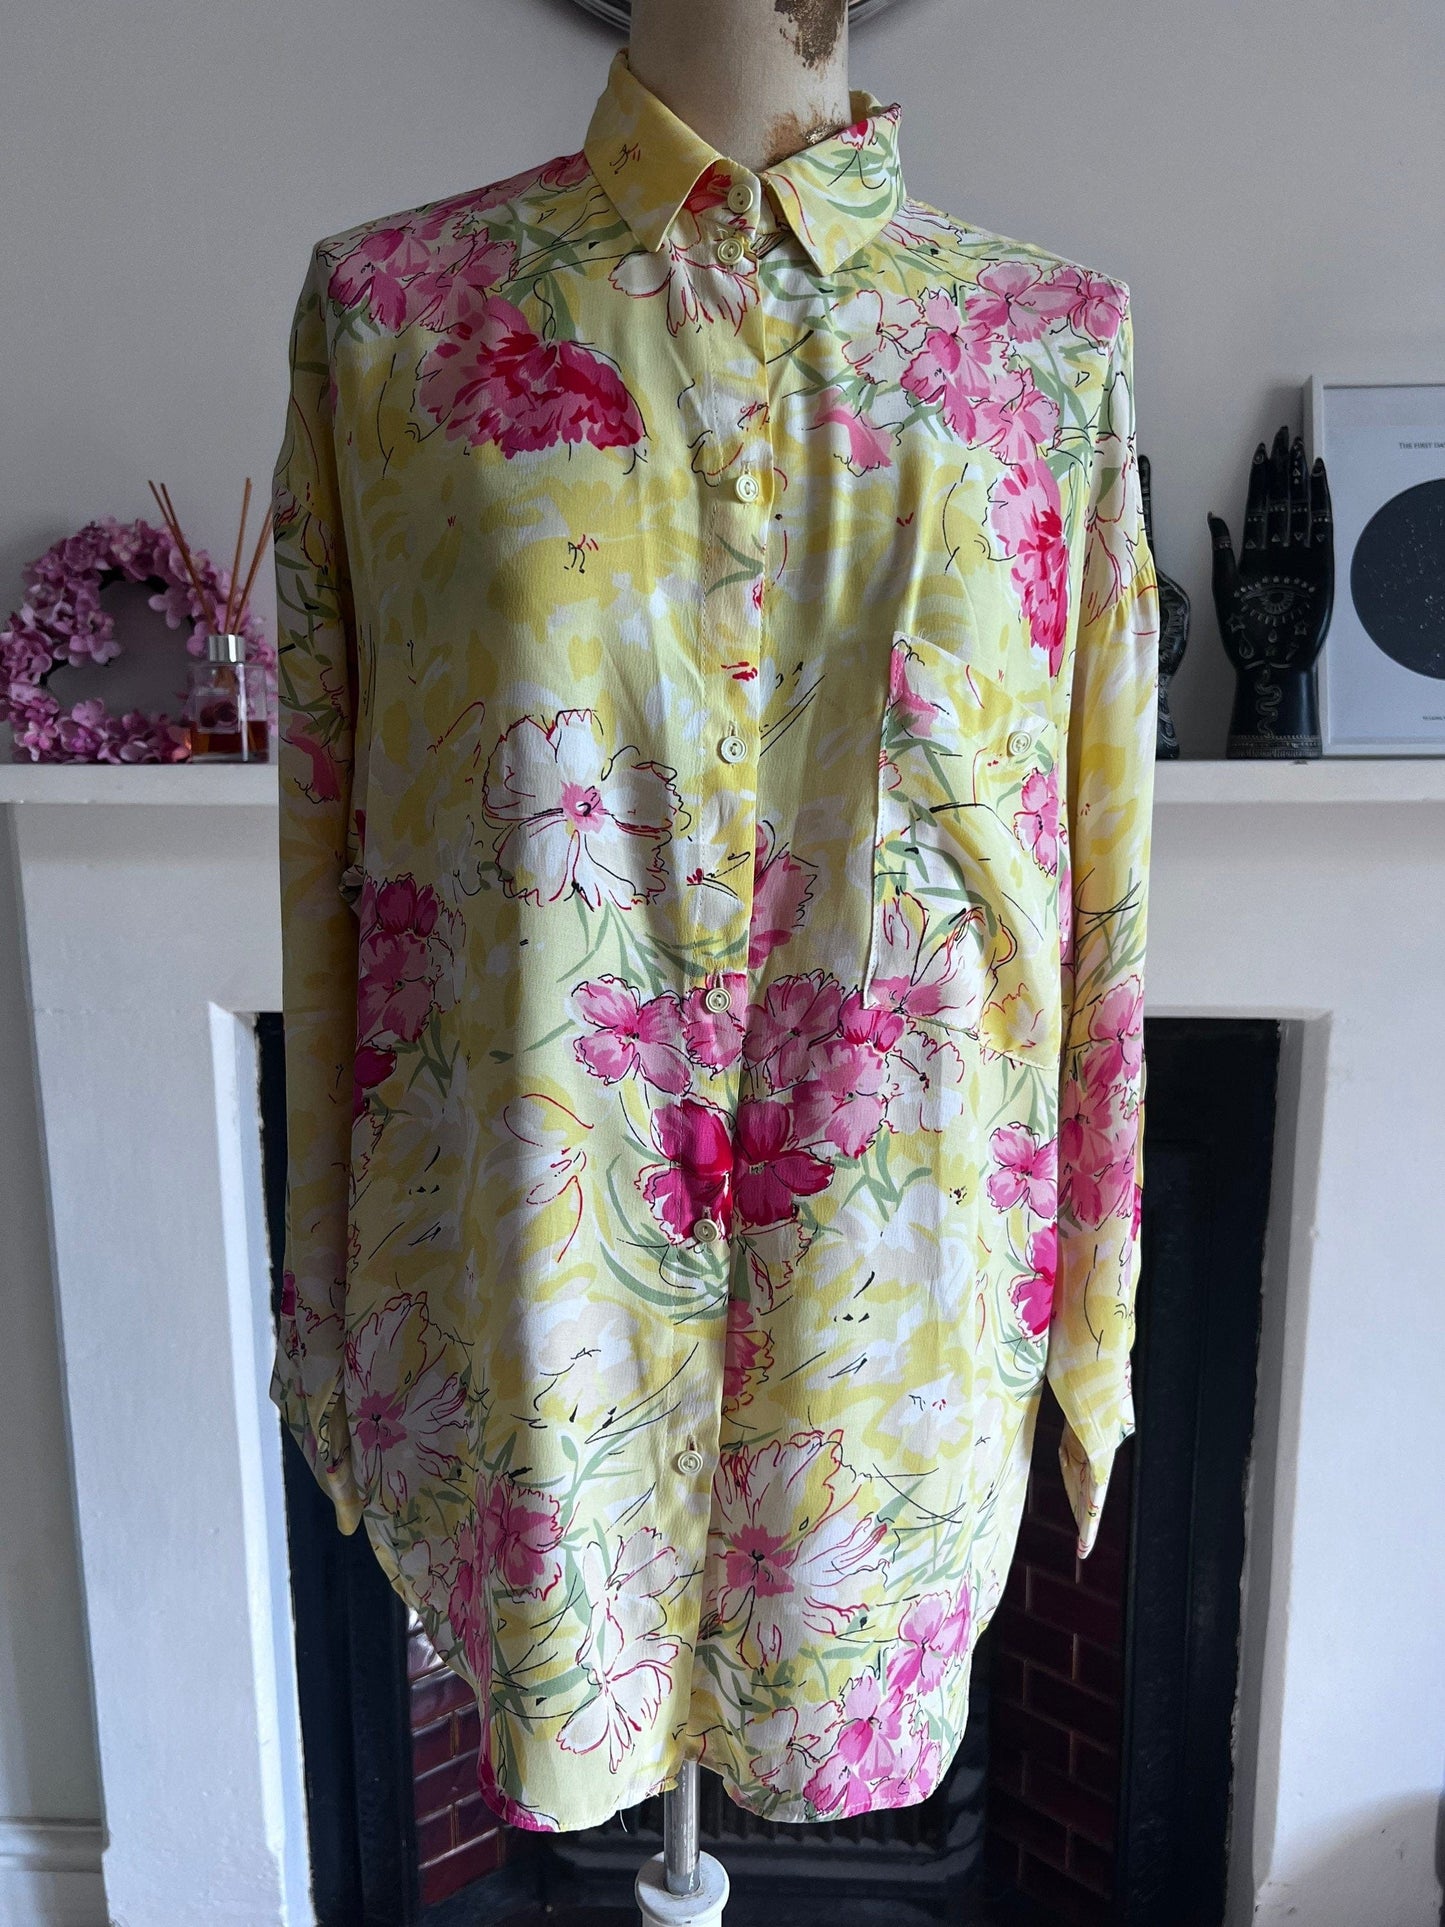 Vintage yellow floral Blouse - long sleeves button front high neck Semi Sheer Shirt - UKM